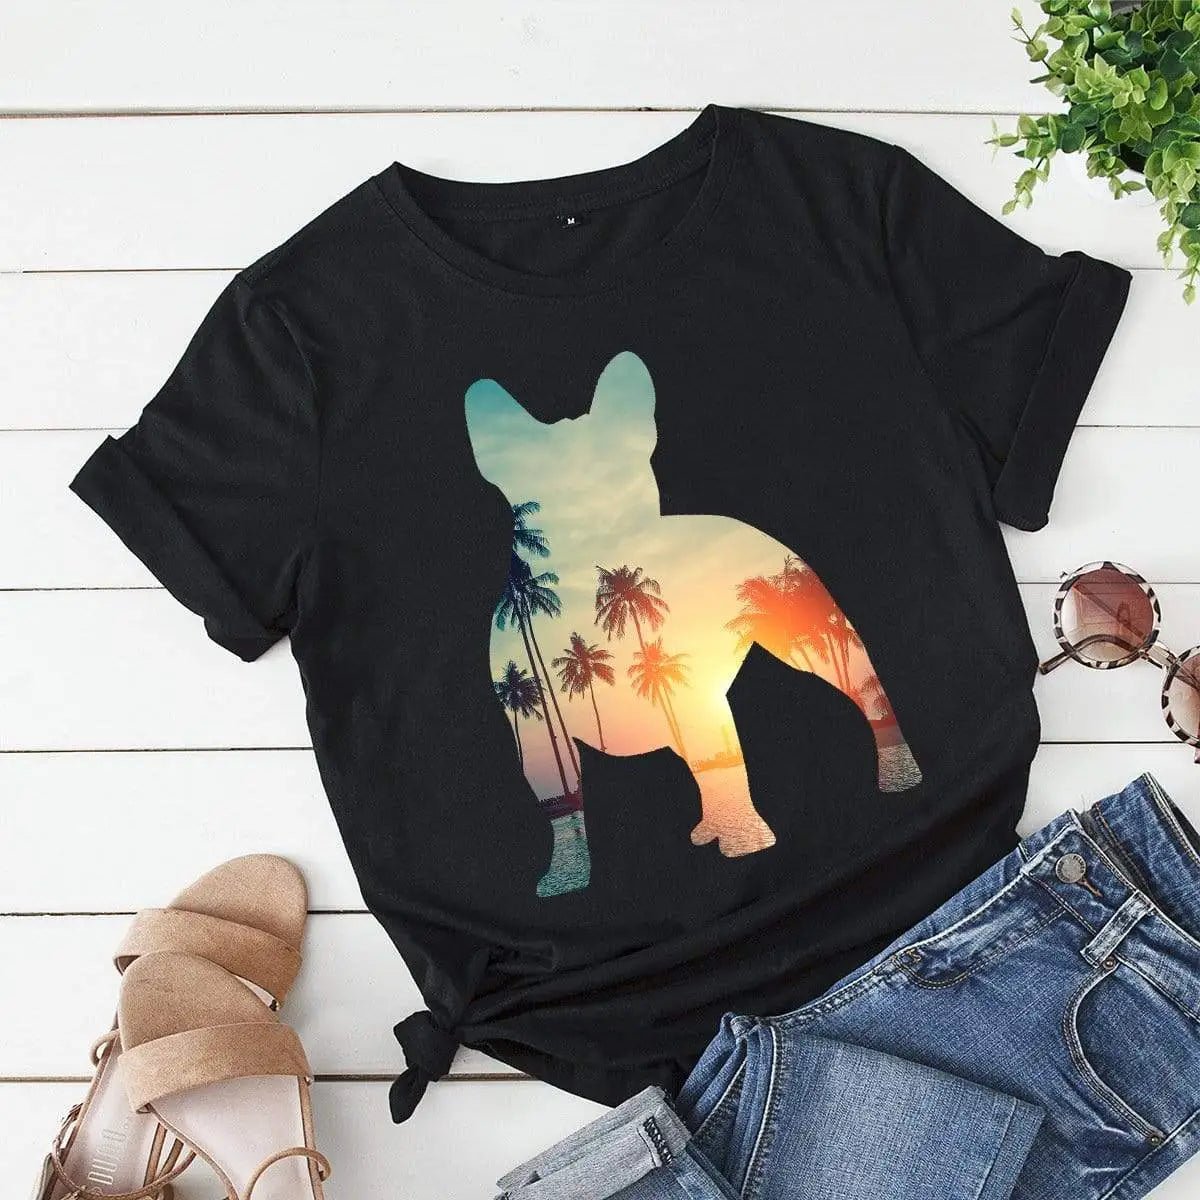 Summer Is Here Women's Relaxed T-Shirt - French Bulldog Store